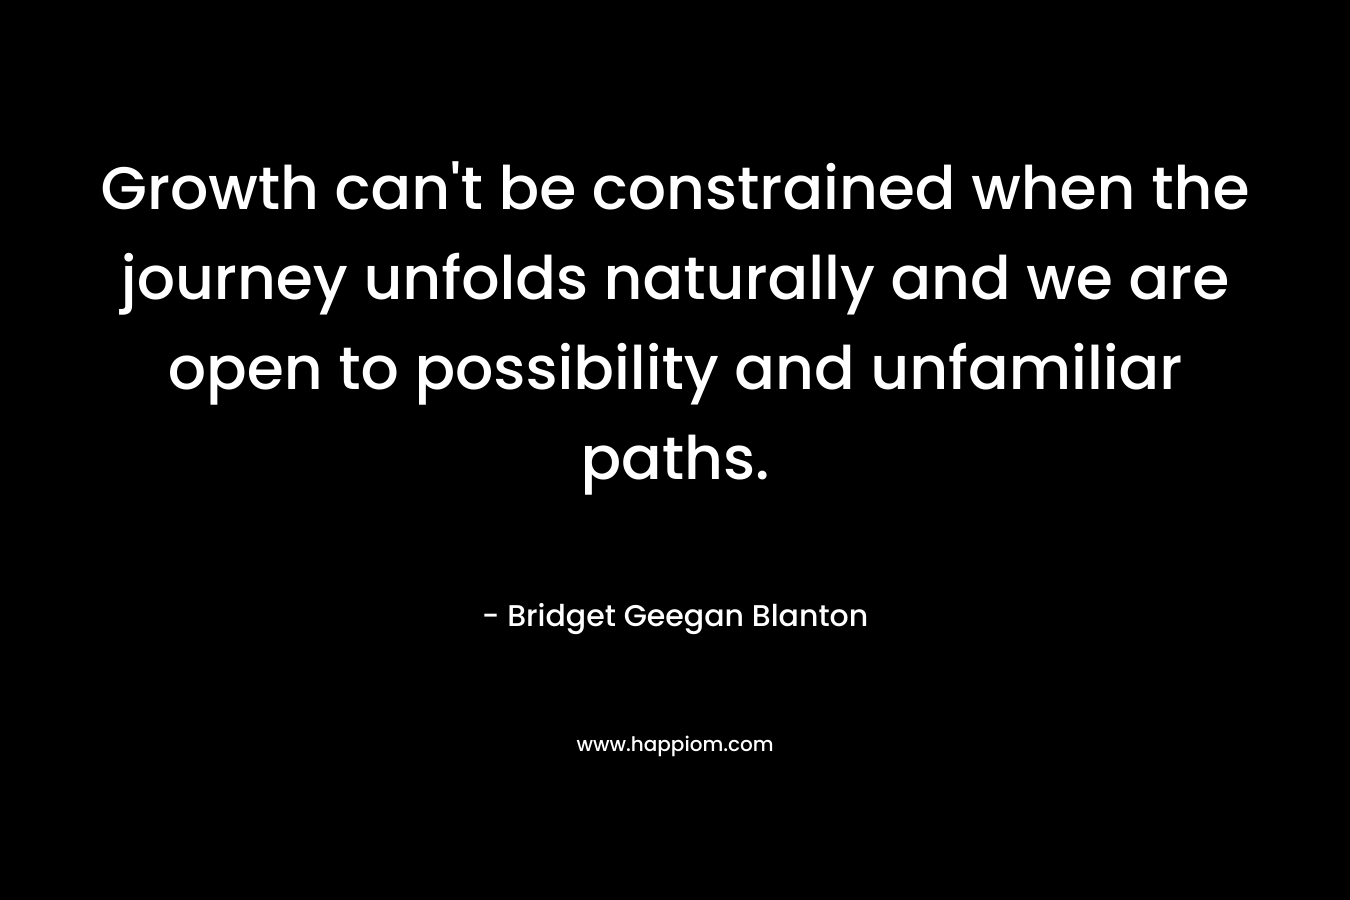 Growth can't be constrained when the journey unfolds naturally and we are open to possibility and unfamiliar paths.